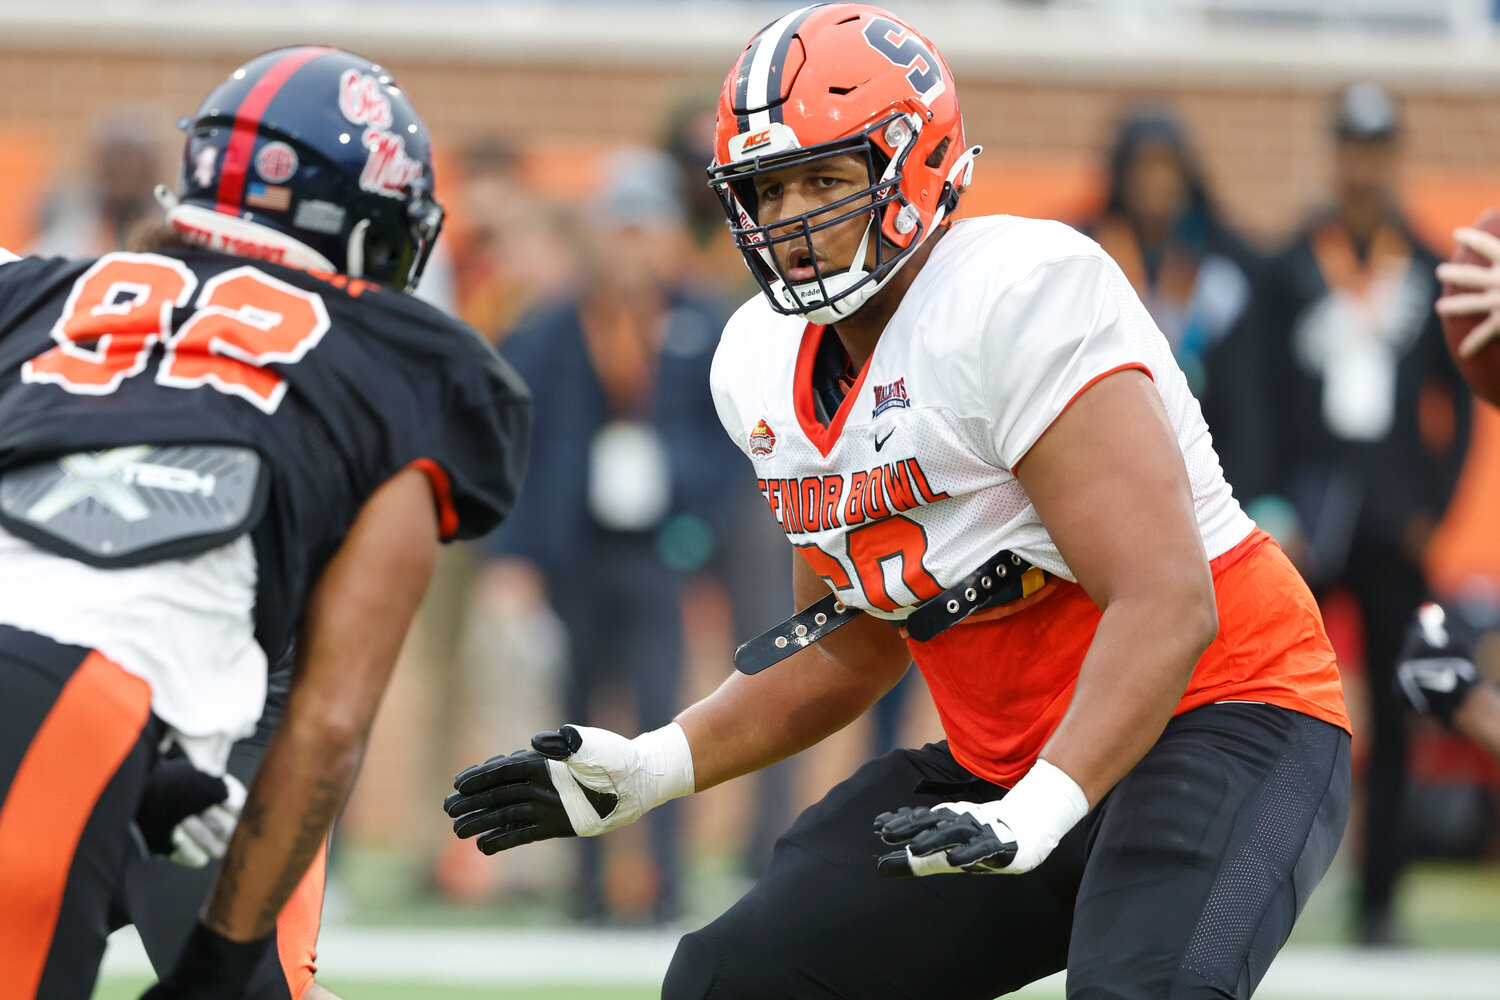 American offensive lineman Matthew Bergeron of Syracuse (60) runs through drills during practice for the Senior Bowl on Feb. 2 in Mobile, Ala. The Atlanta Falcons drafted Bergeron on Friday night with the 38th pick in the second round of the NFL draft.